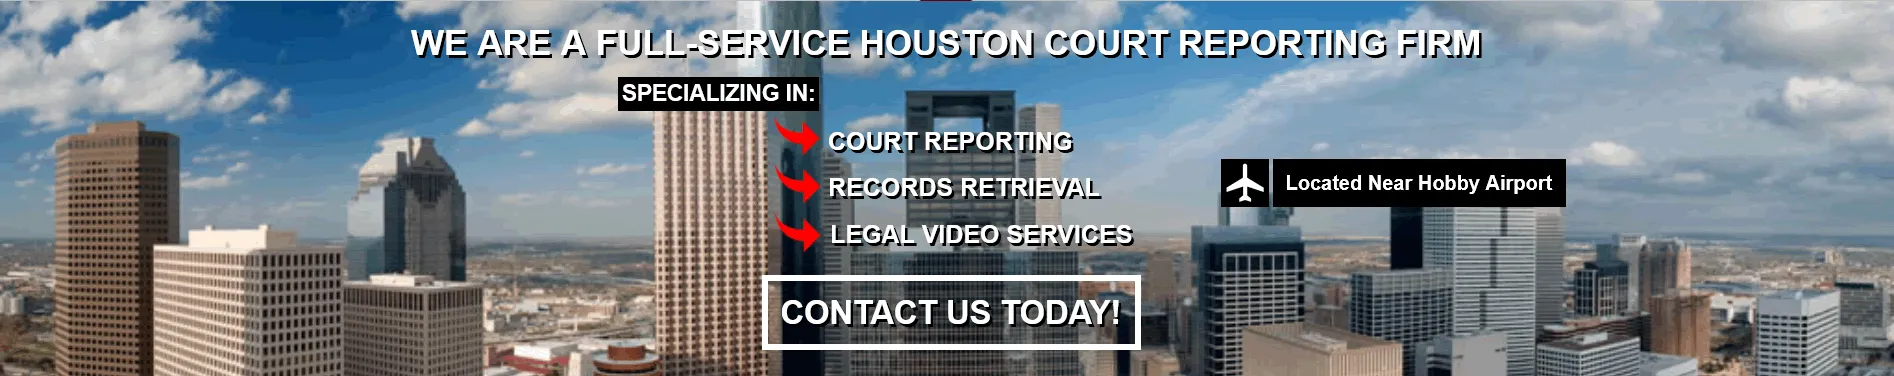 Ross Reporting Services - Houston Court Reporter and Records Retrieval